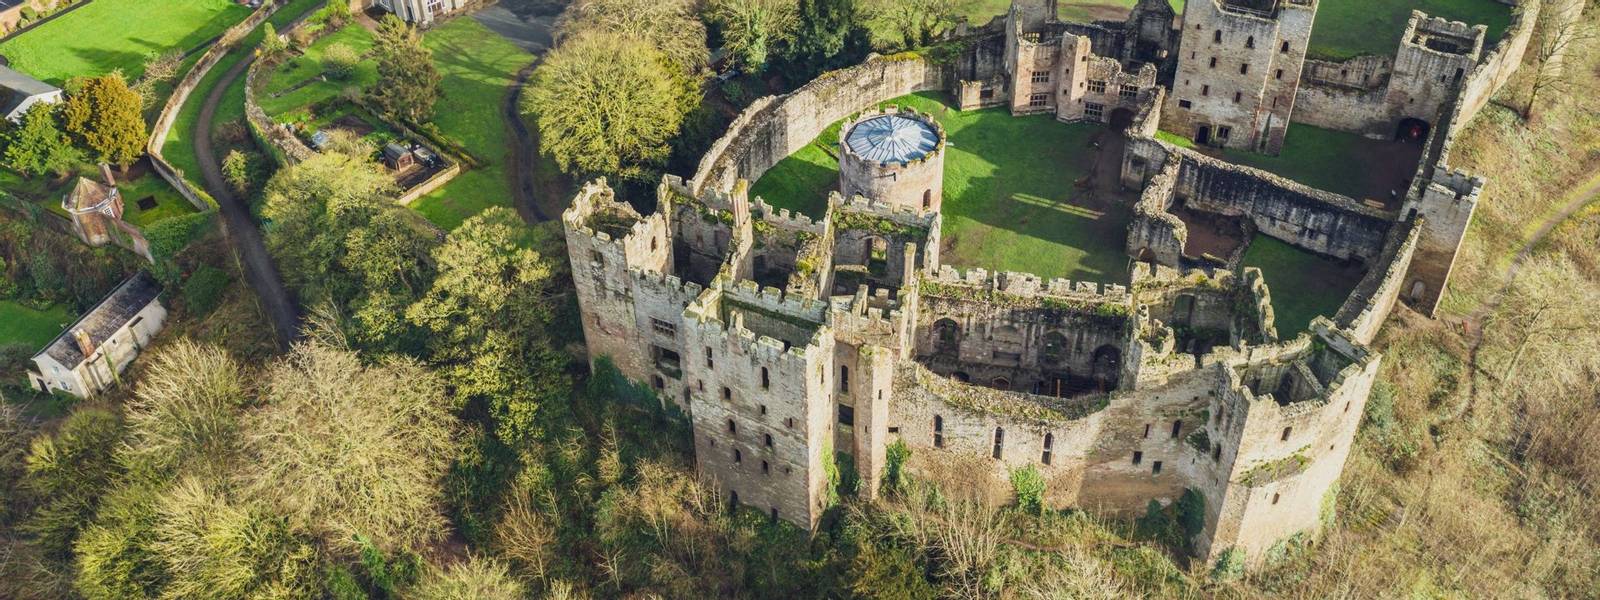 Top down aerial view over ruins of medieval fortification - Ludlow Castle in Shropshire, UK